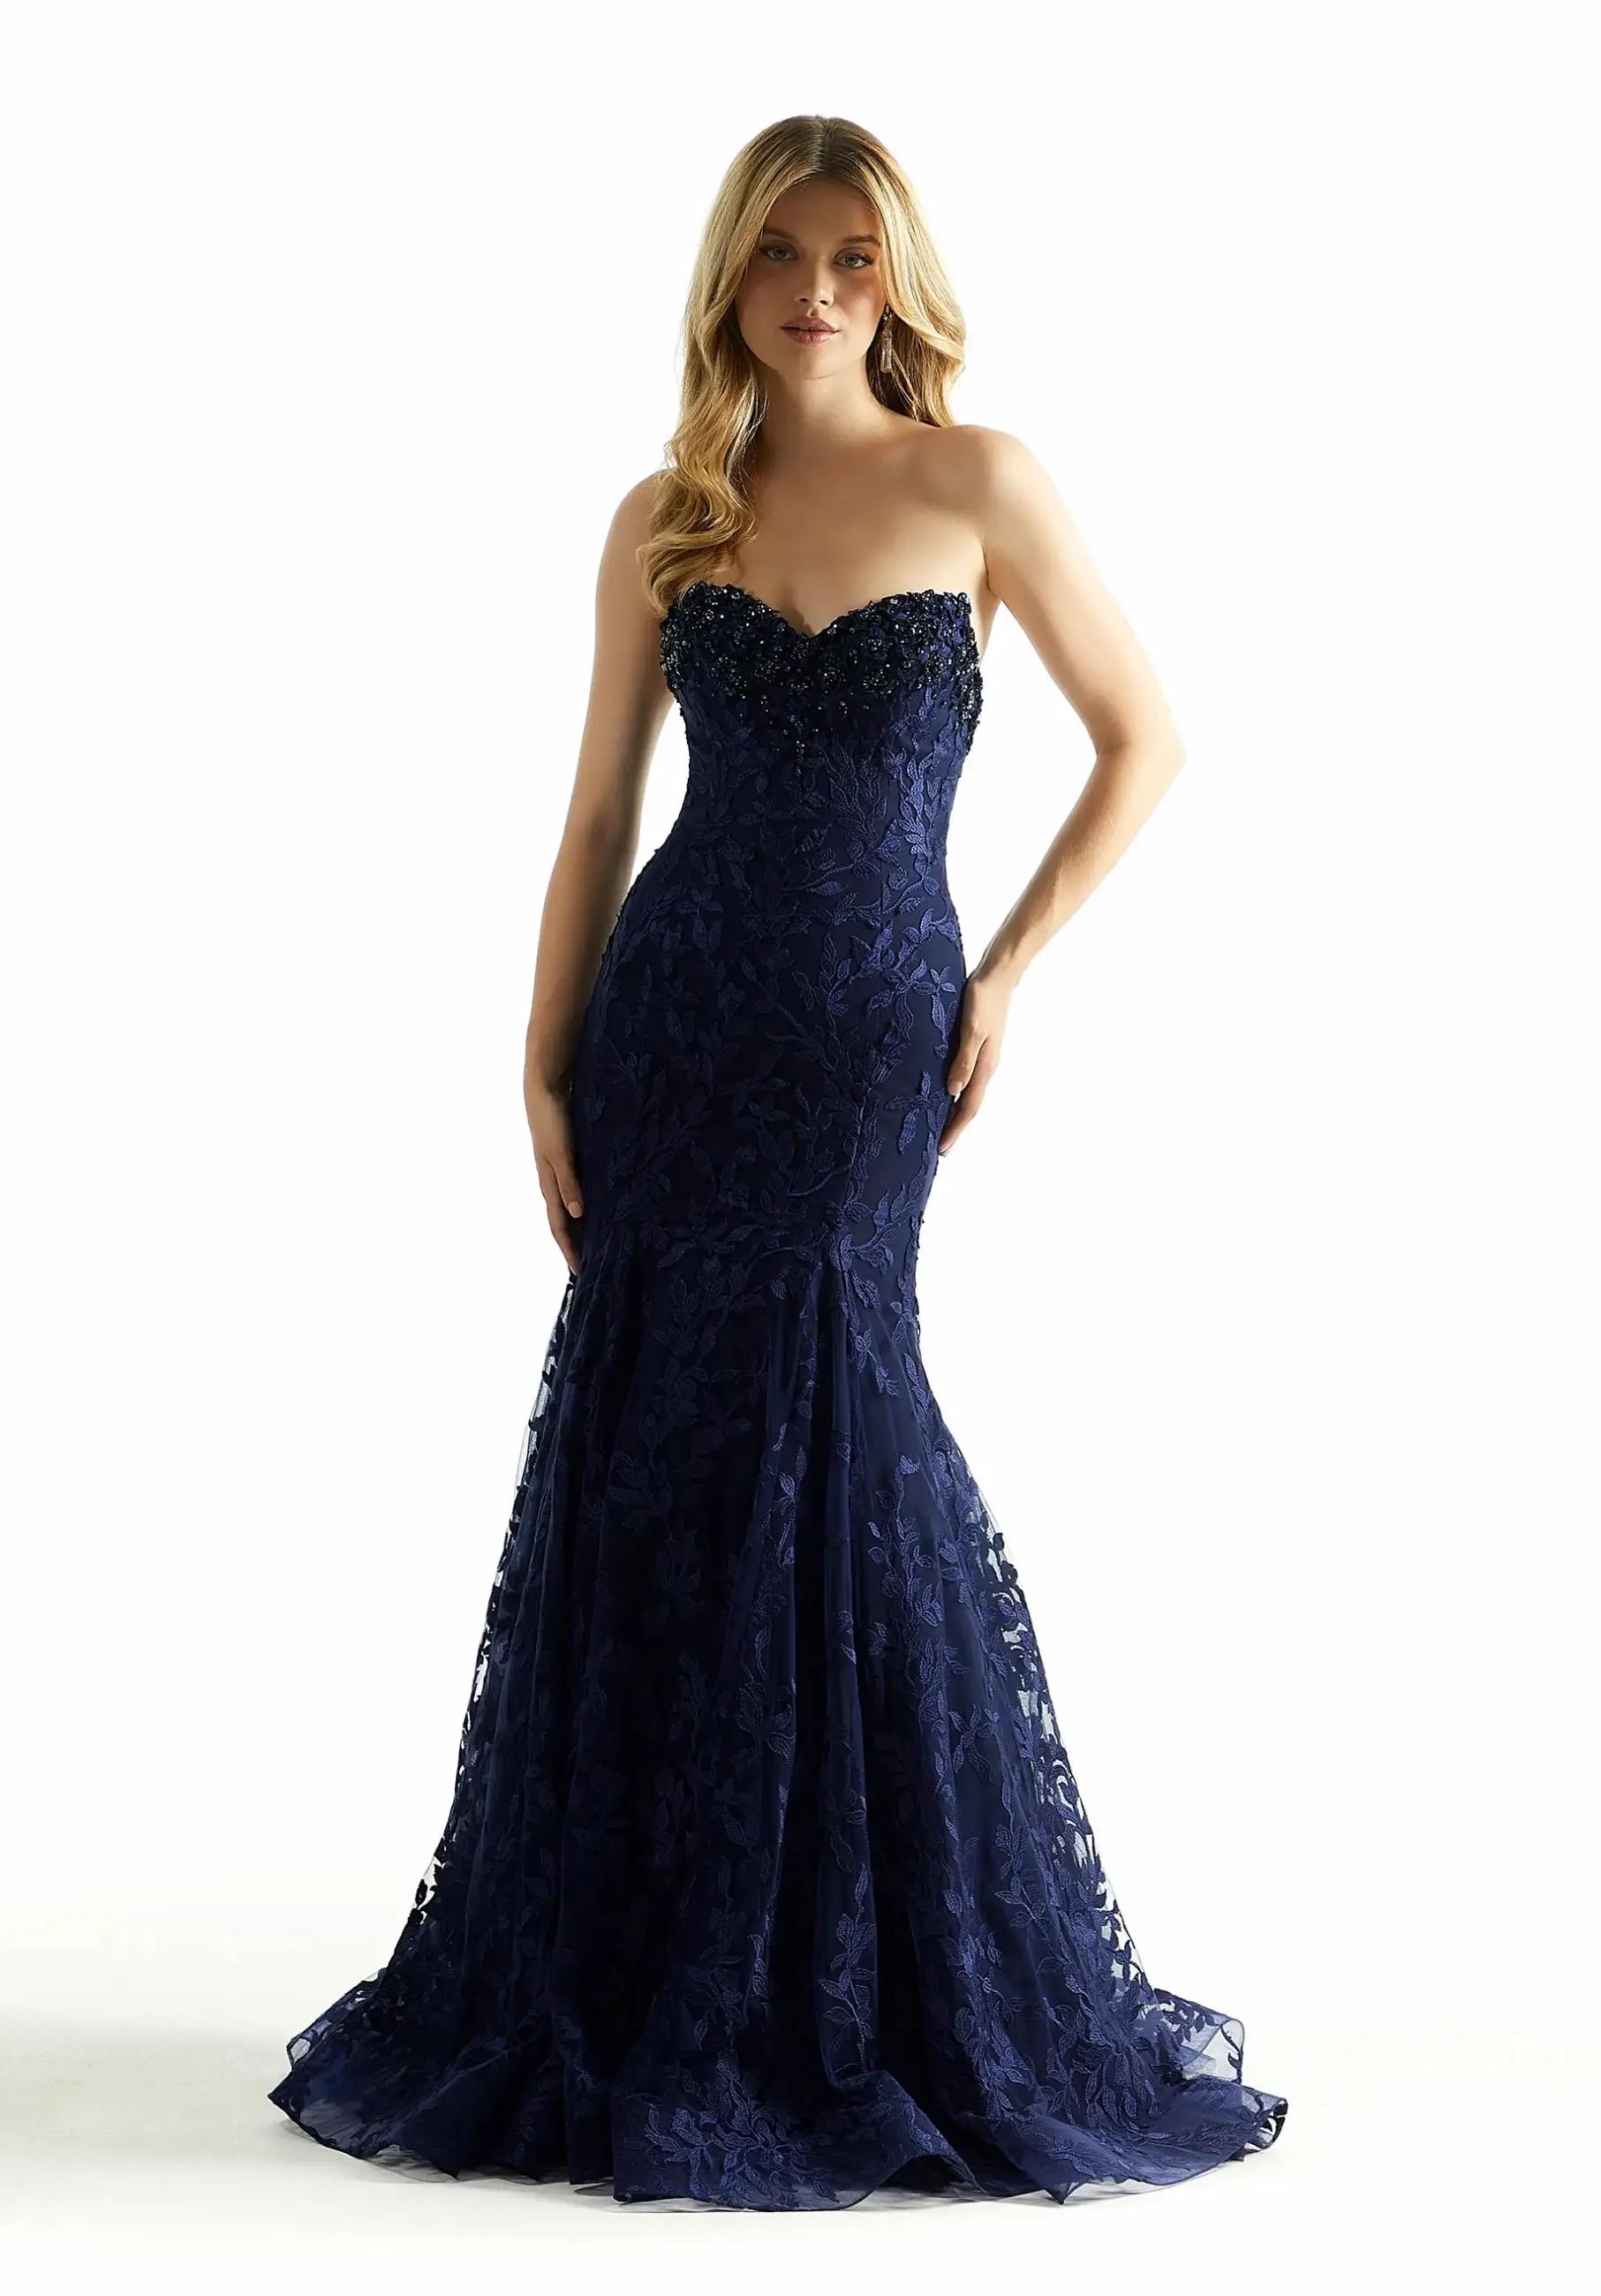 A-Line or Mermaid? Finding the Perfect Prom Dress Silhouette for You Image